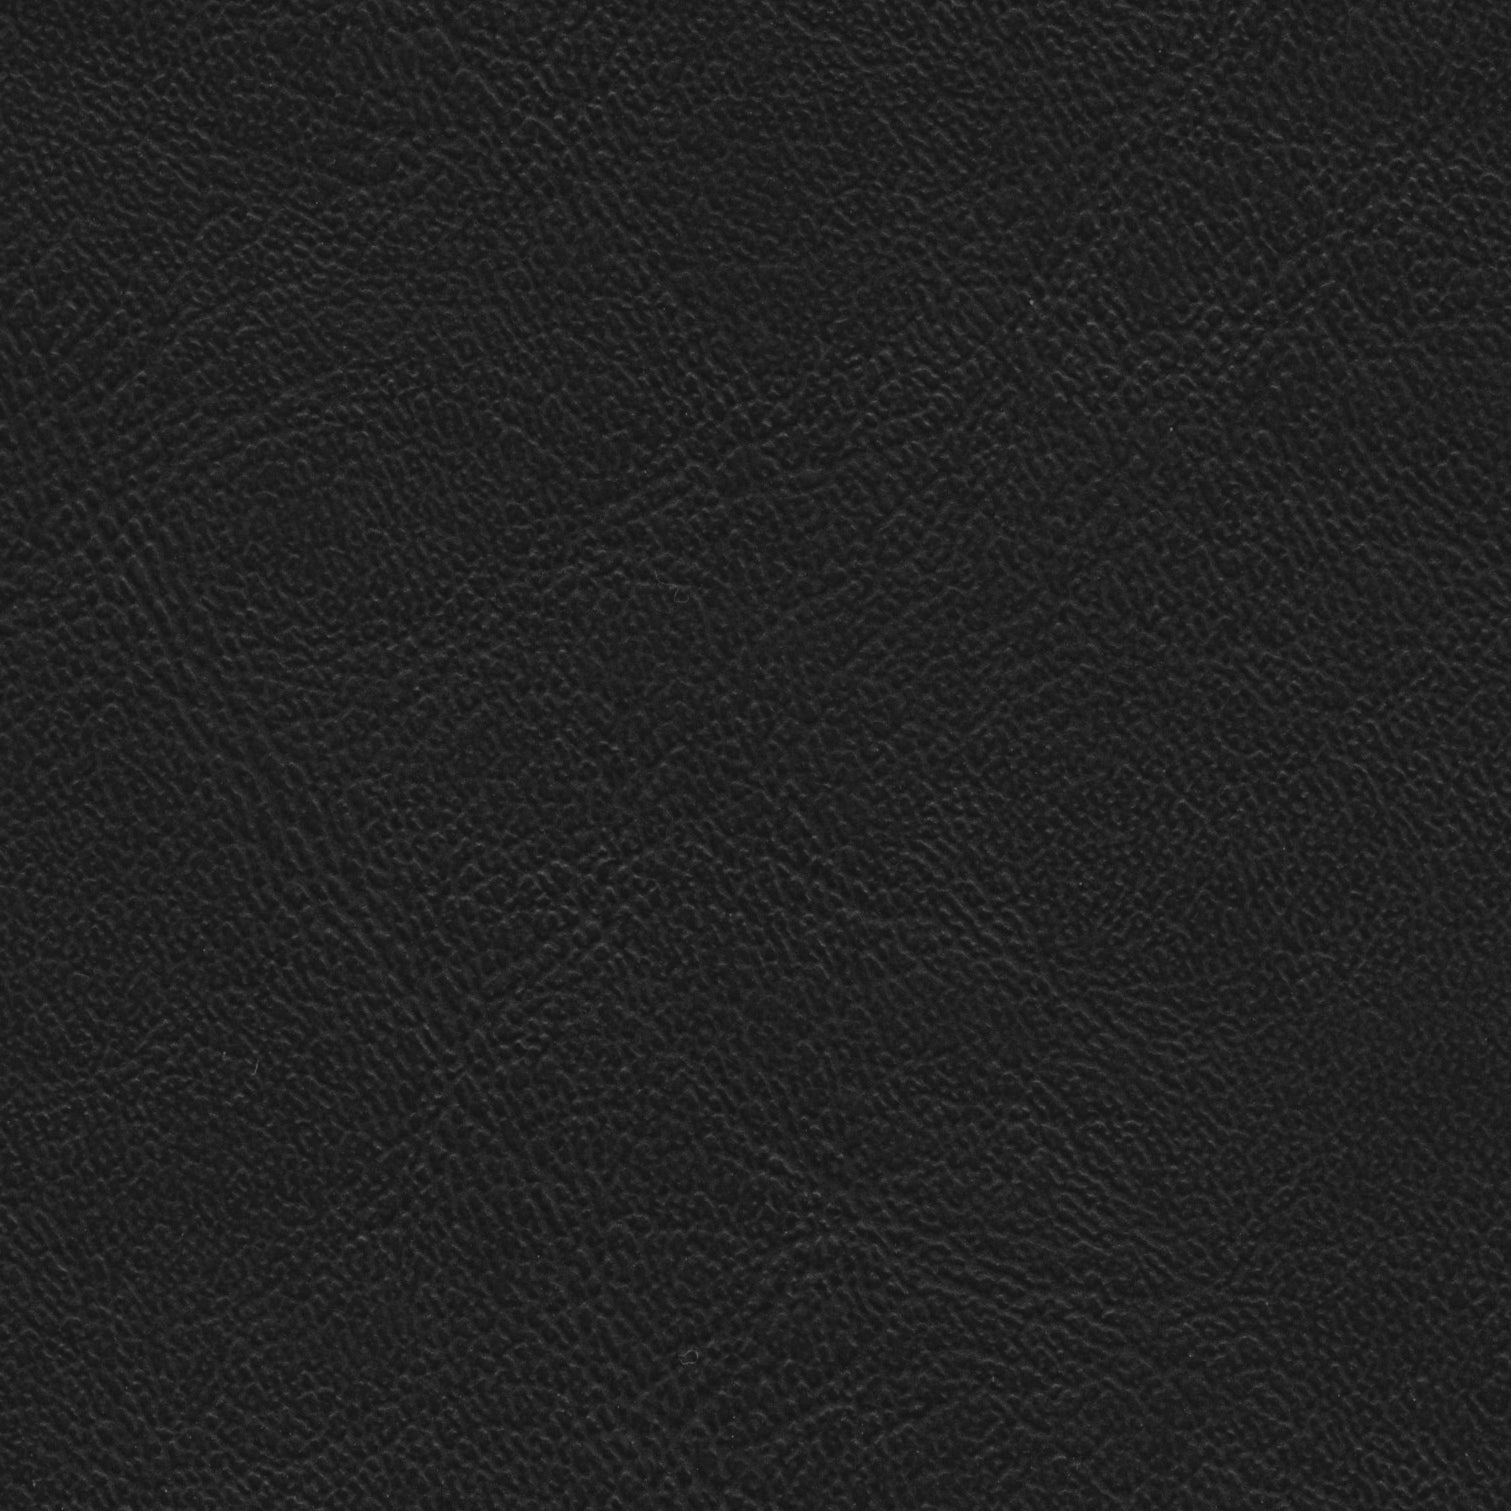 Sterling FR Faux Leather Fabric Black